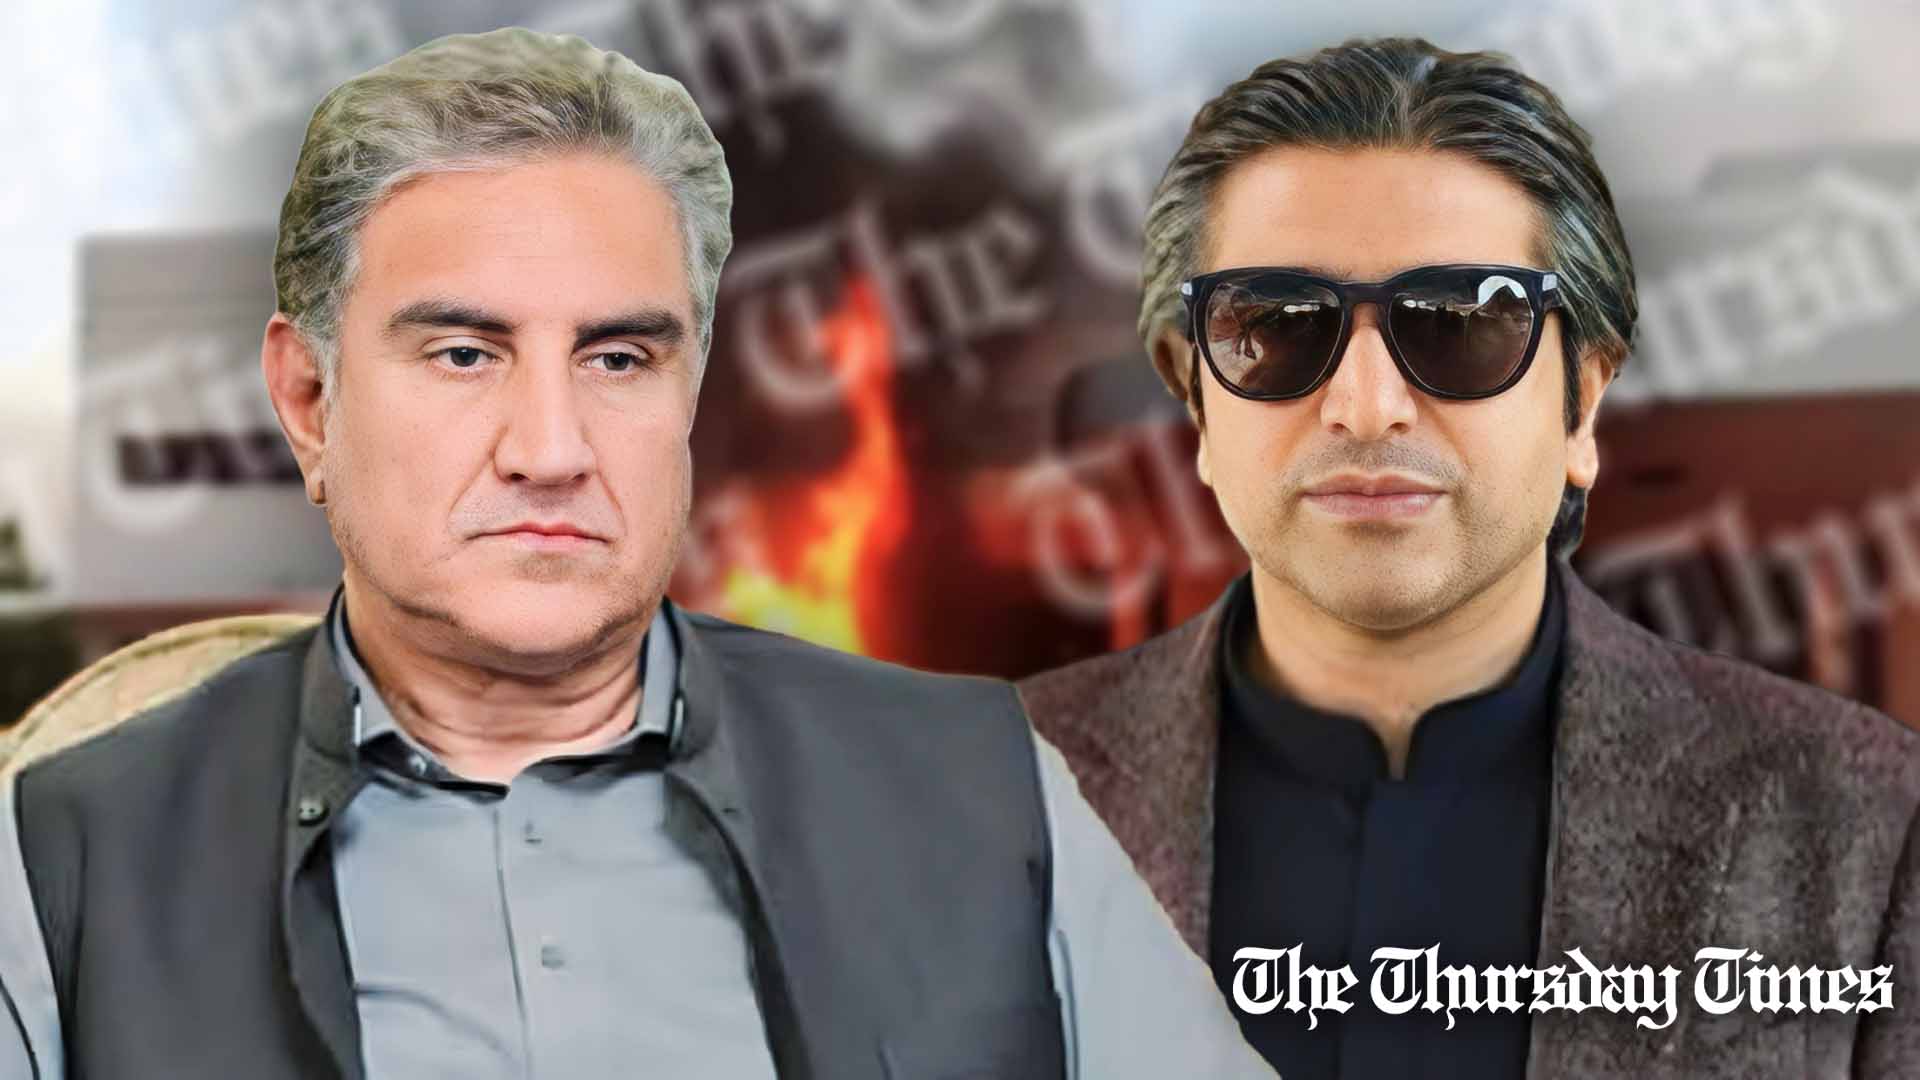 A combined file photo shows former PTI senior leader Shah Mahmood Qureshi (L) and journalist Hassan Ayub Khan (R). — FILE/THE THURSDAY TIMES